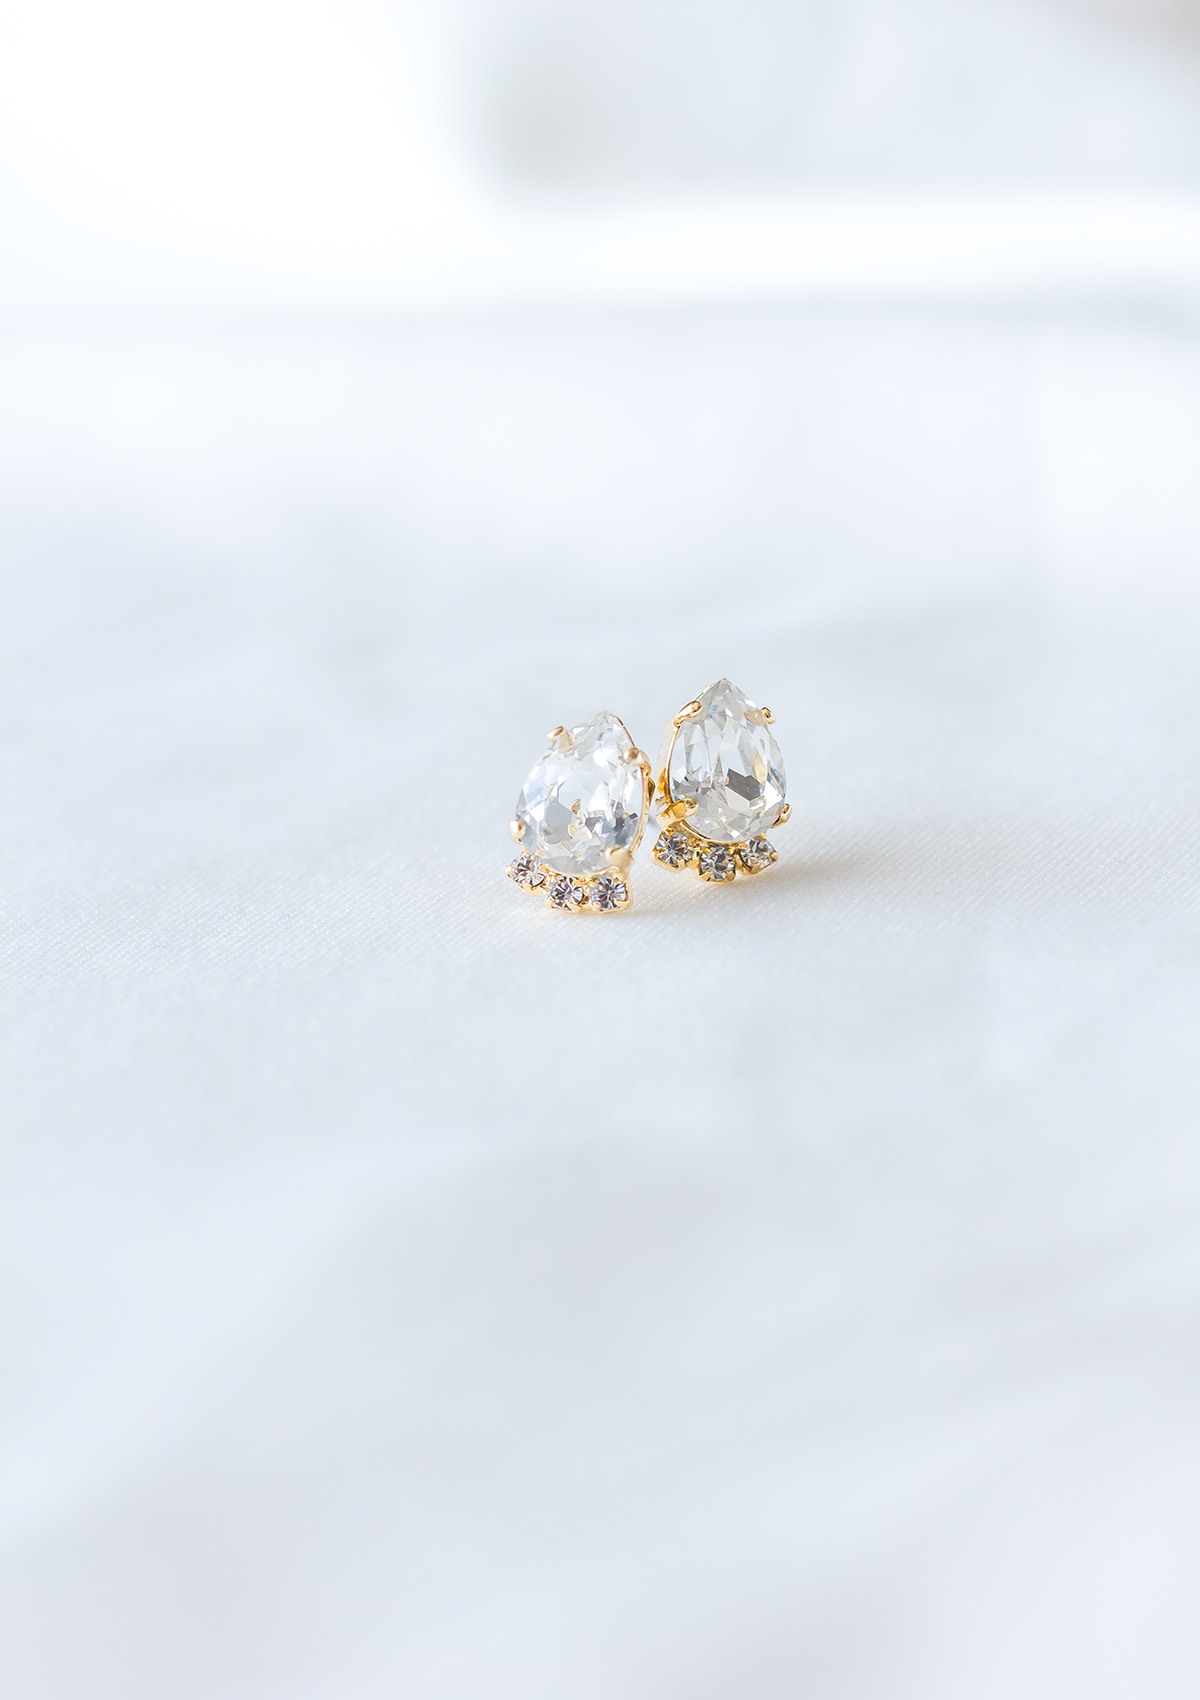 New Bree Studs to wear everyday or gift to someone special, jewelry designed and made by Sarah Gauci in Malta. 24K gold Plated.